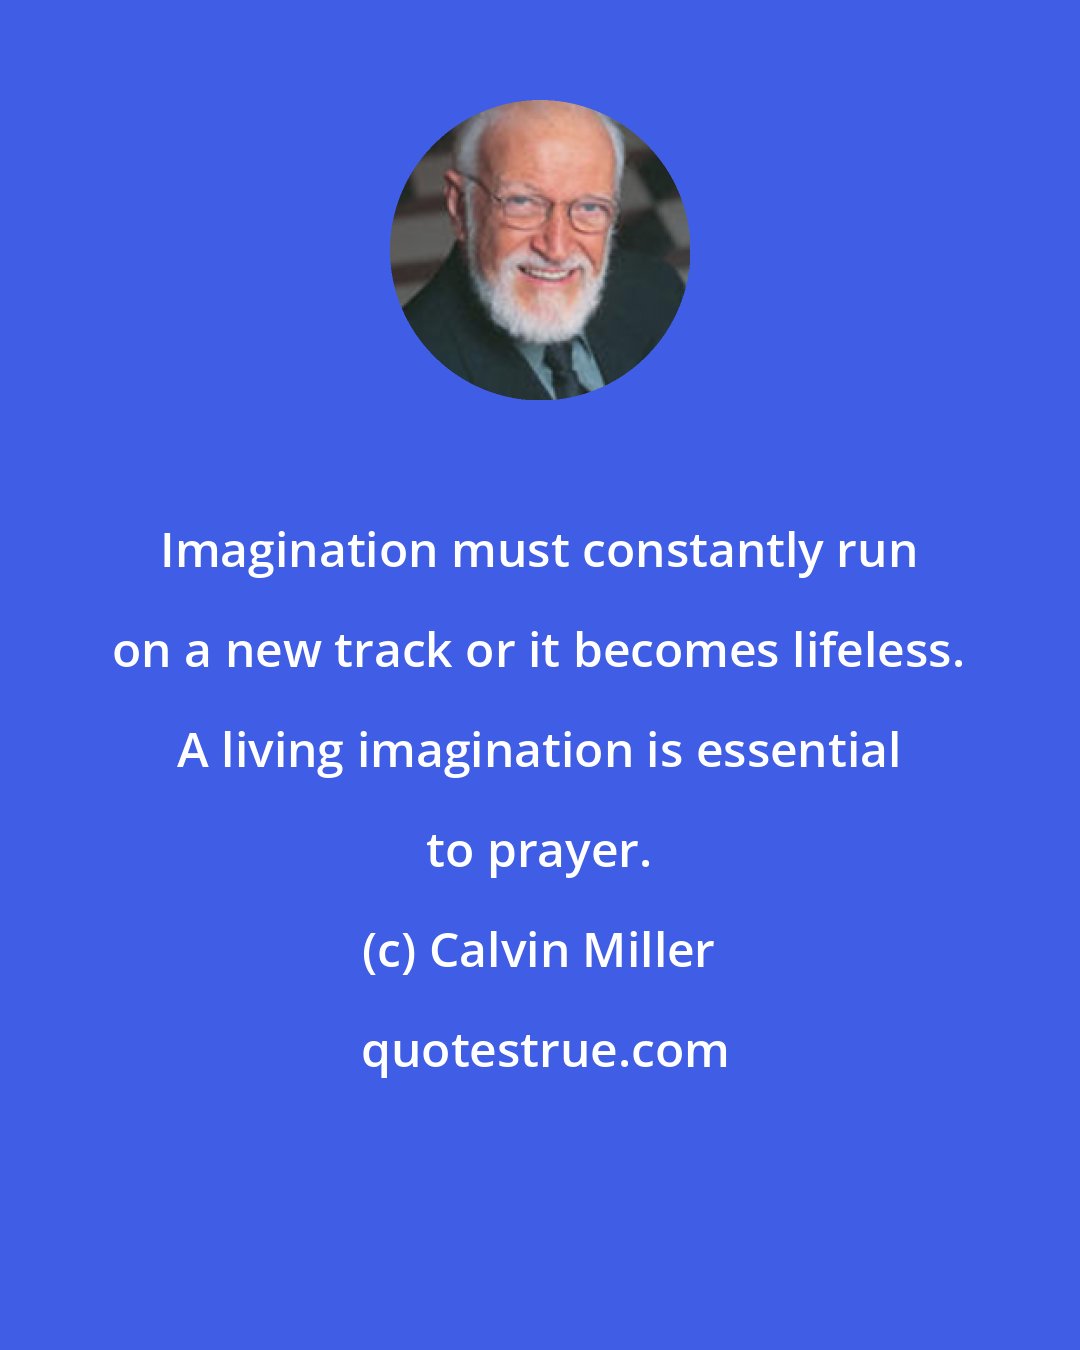 Calvin Miller: Imagination must constantly run on a new track or it becomes lifeless. A living imagination is essential to prayer.